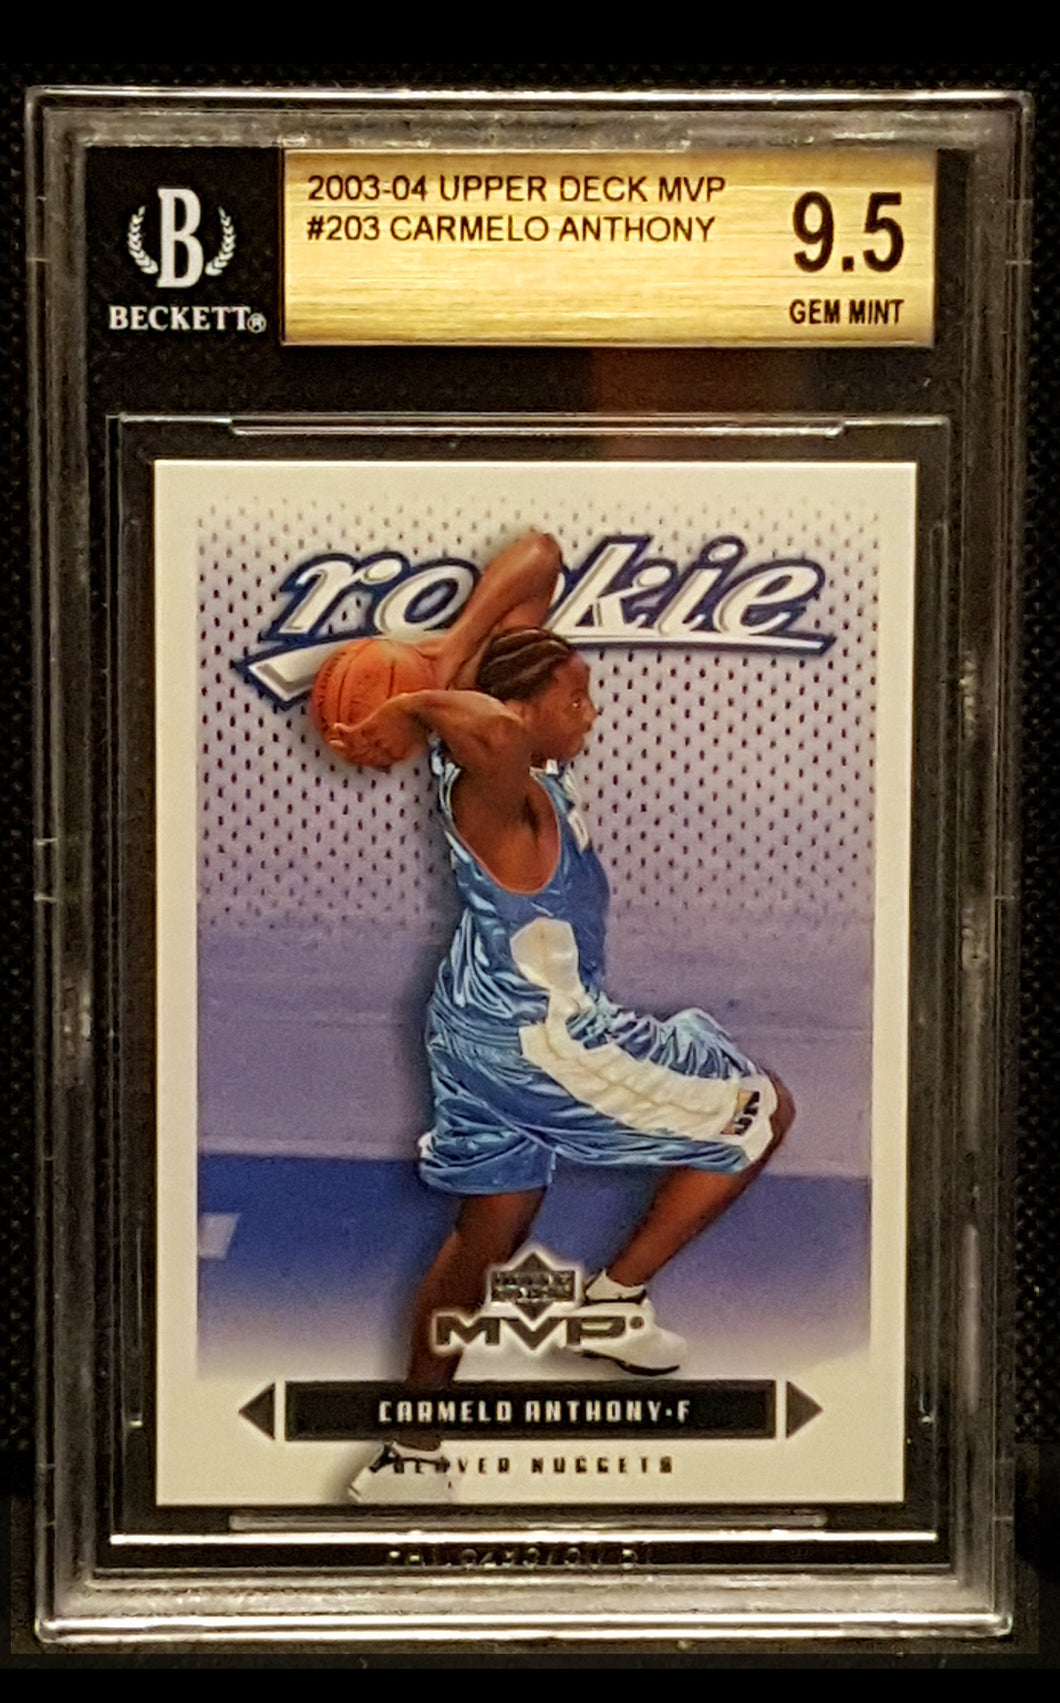 2003 Carmelo Anthony Upper Deck MVP Rookie RC #283 - BGS 9.5